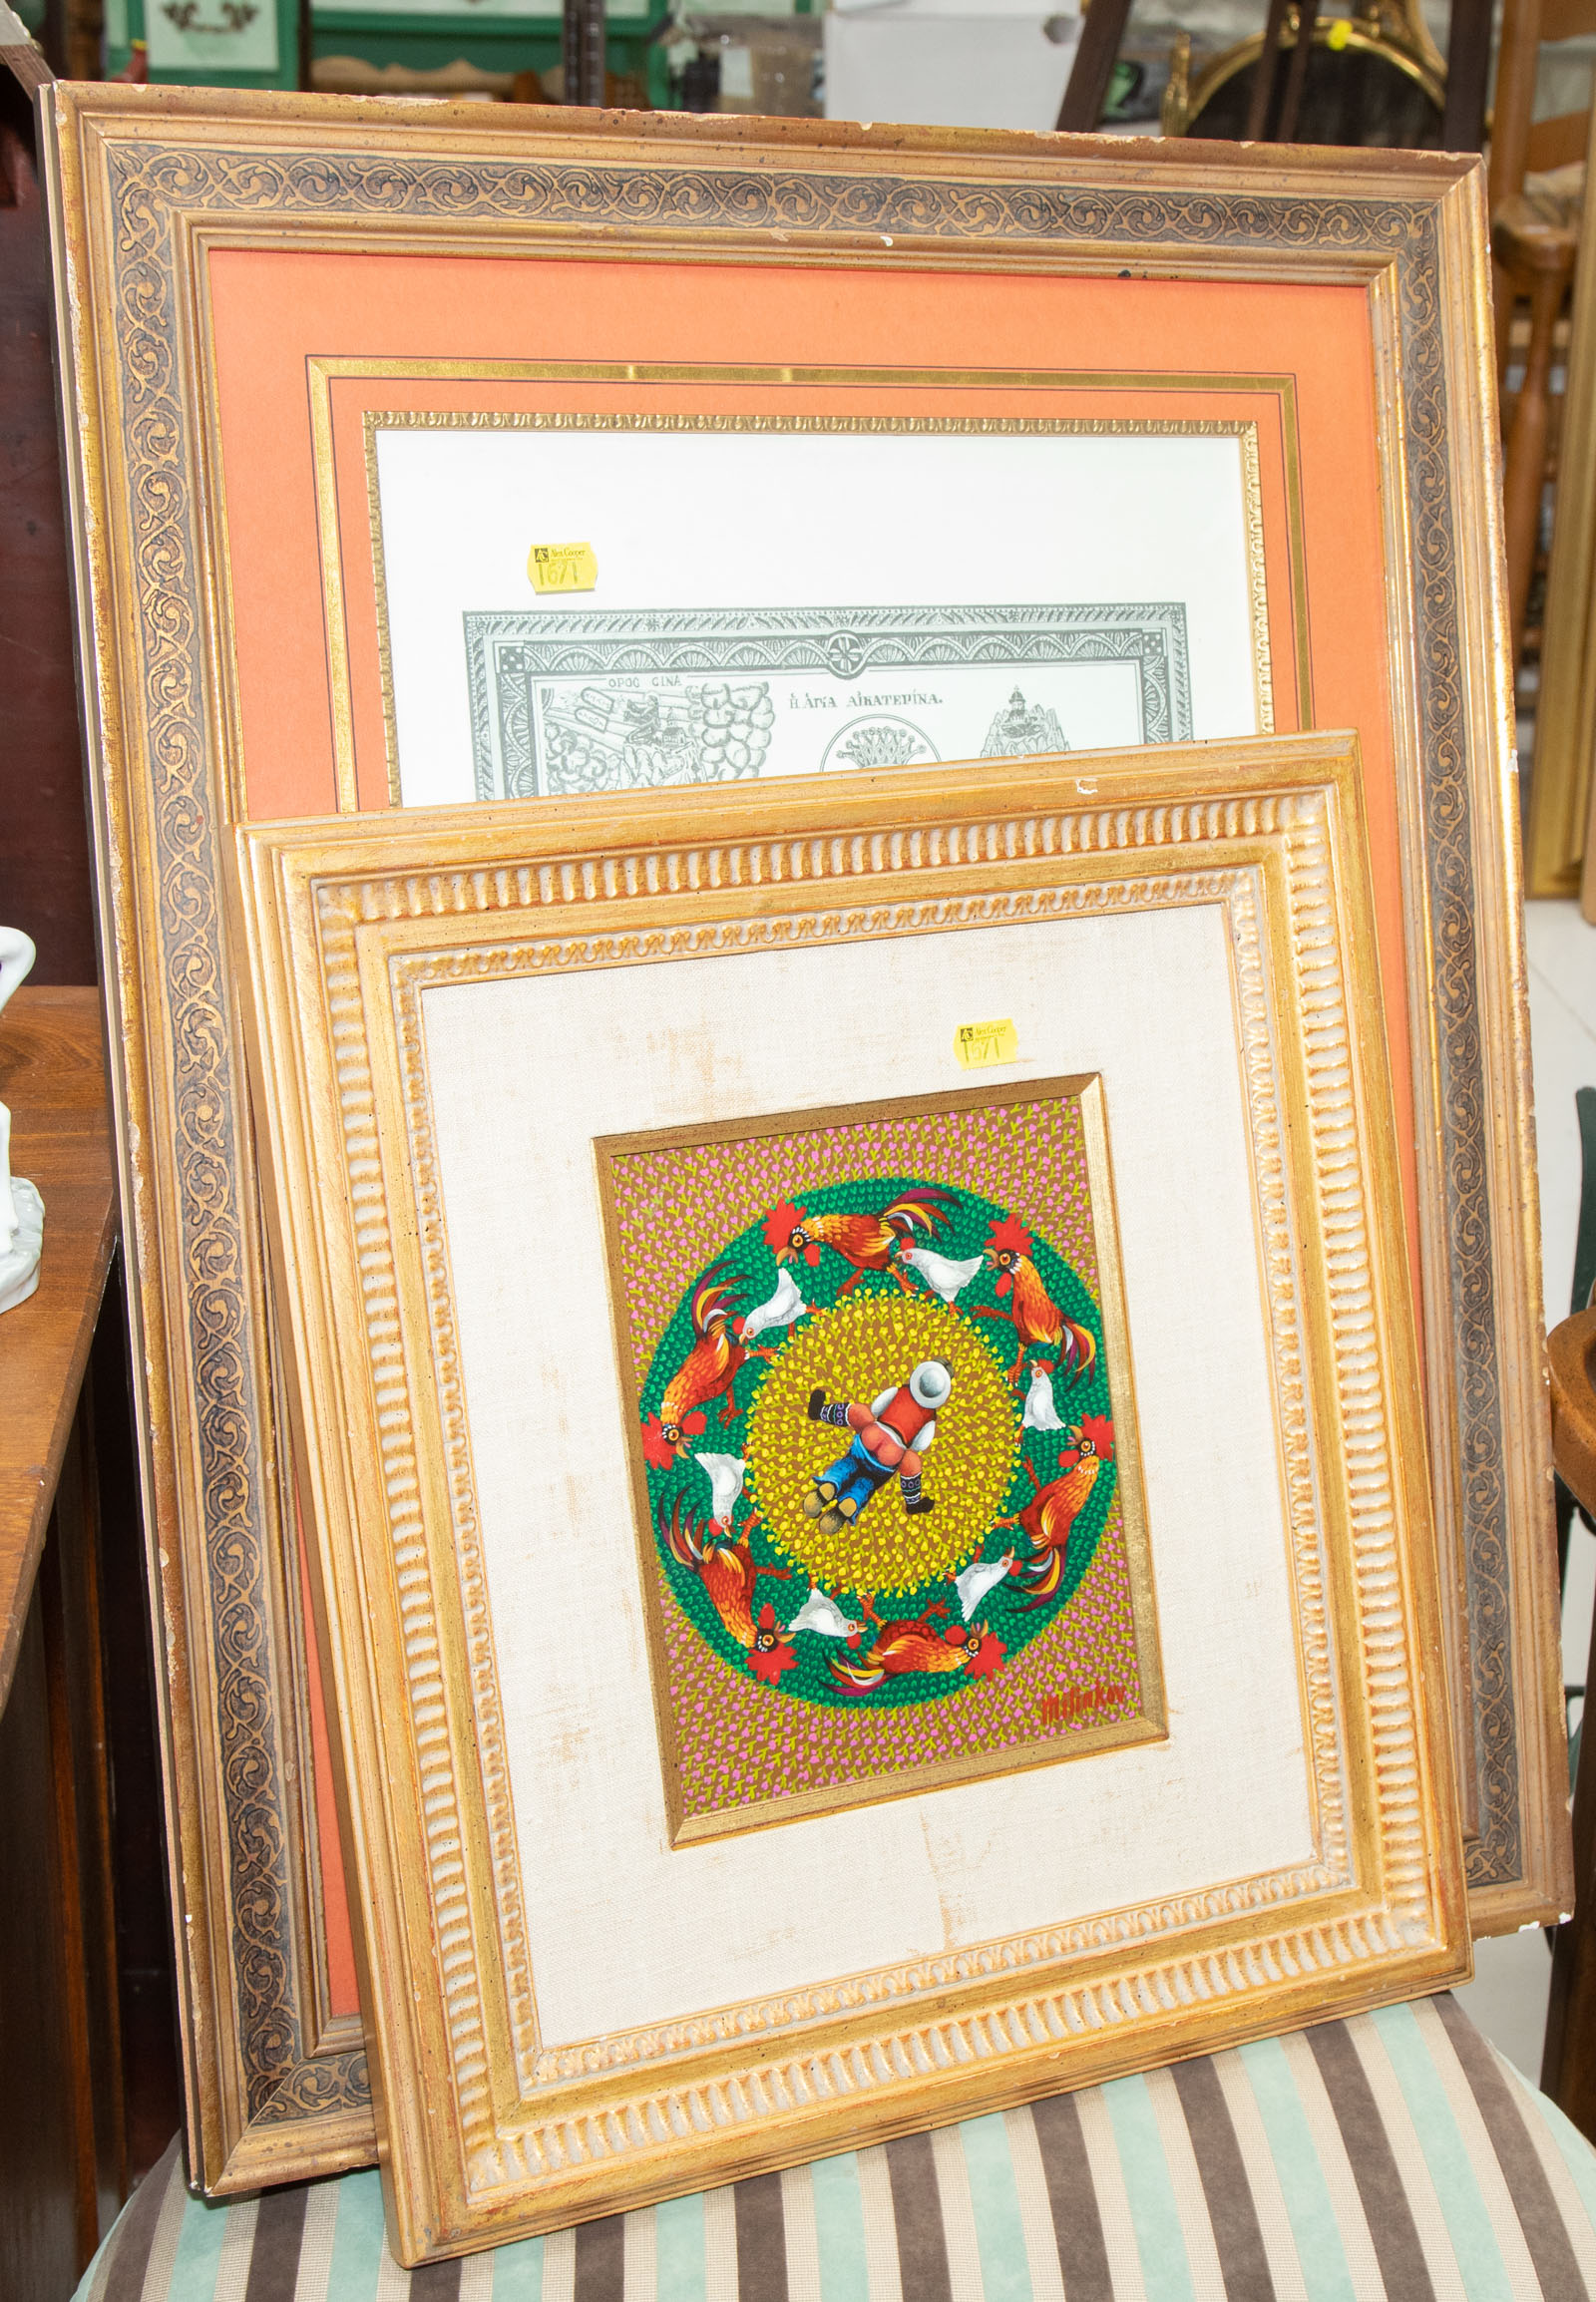 TWO FRAMED ARTWORKS Includes an